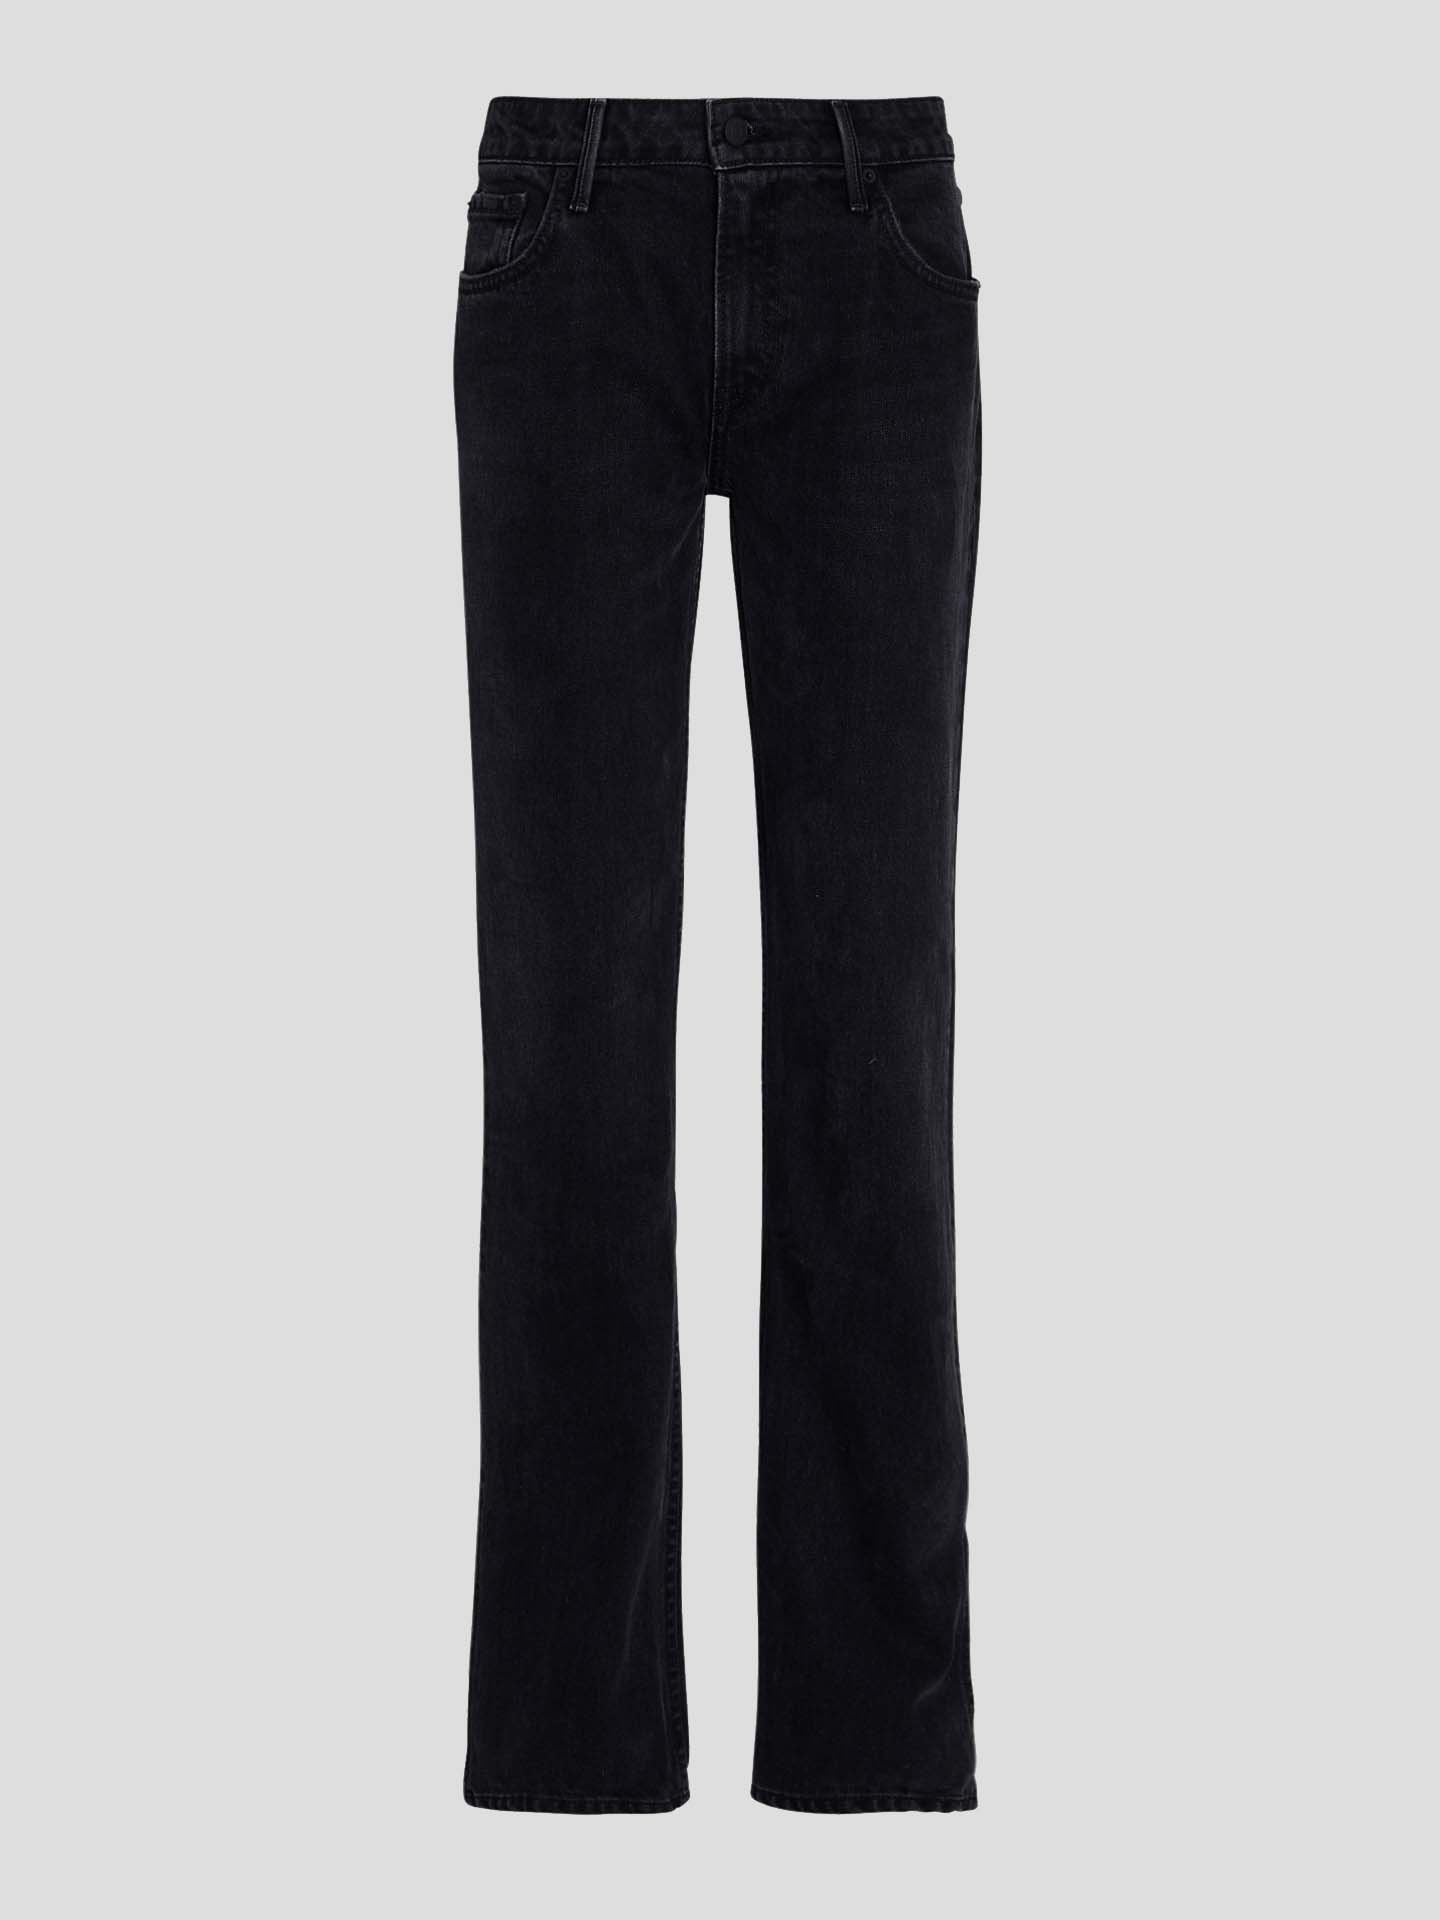 Hailey Black Wash Low Rise Jeans | York